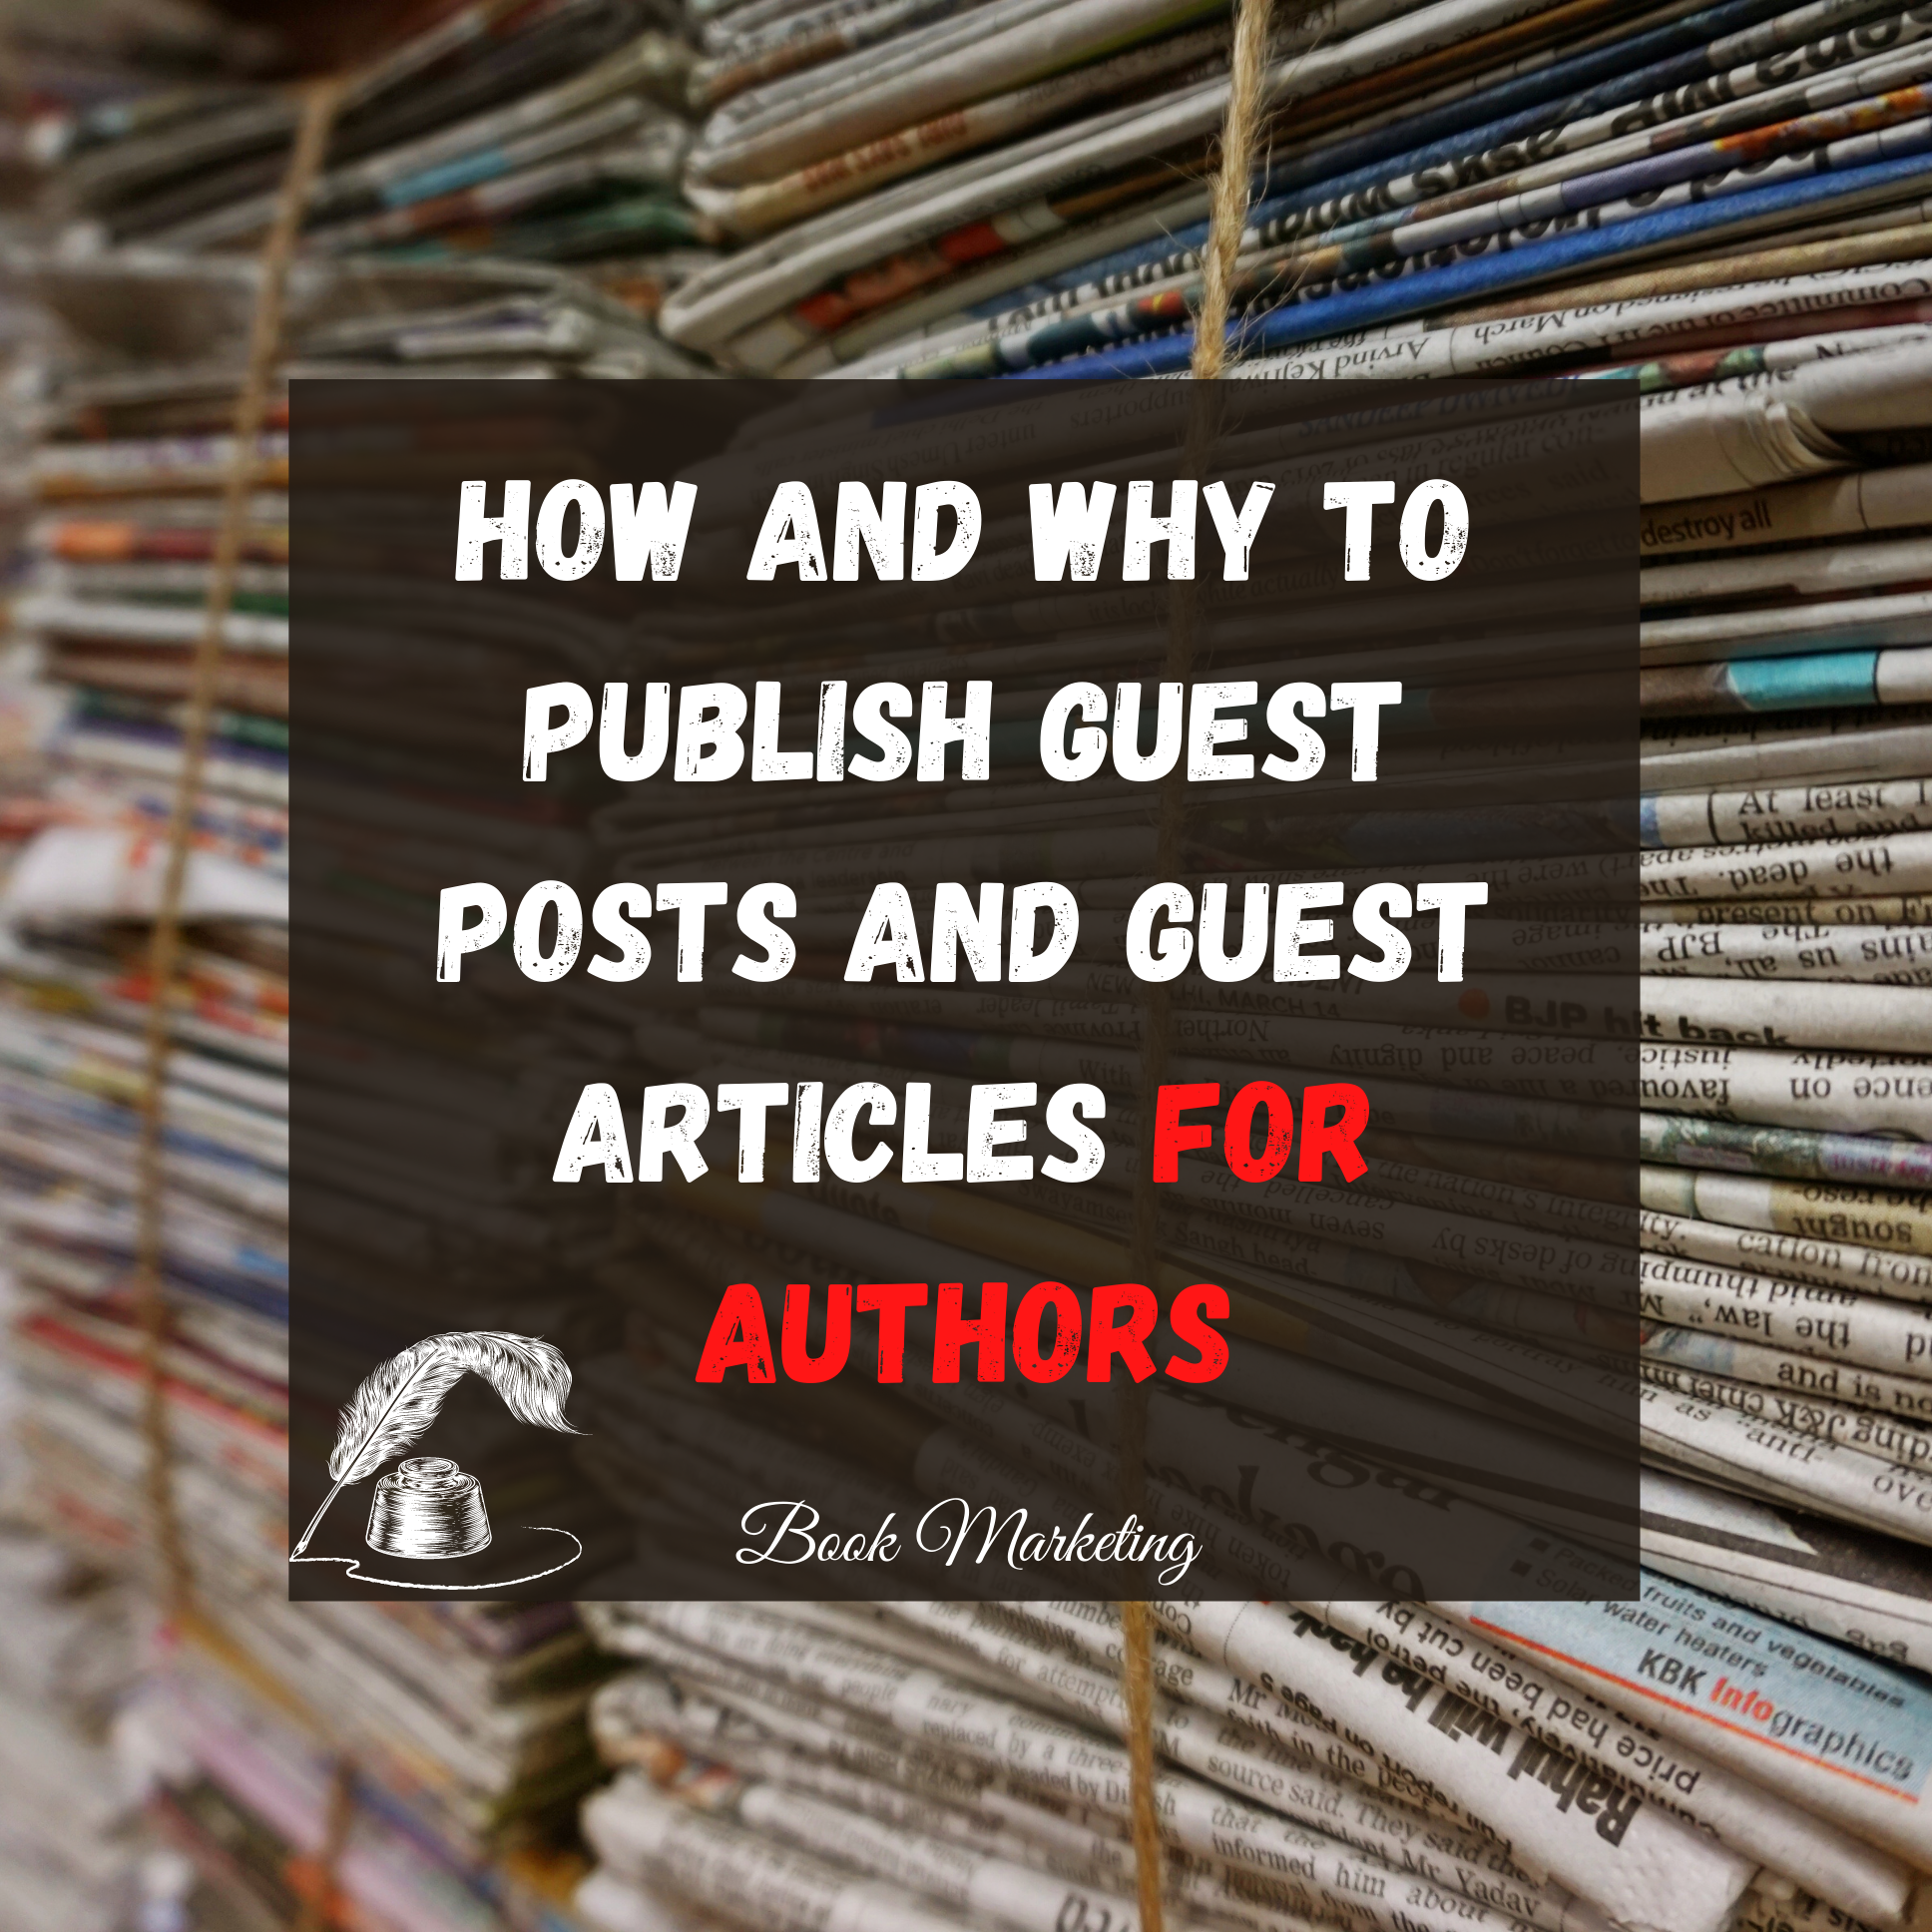 How and Why to Publish Guest Posts and Guest Articles for Authors